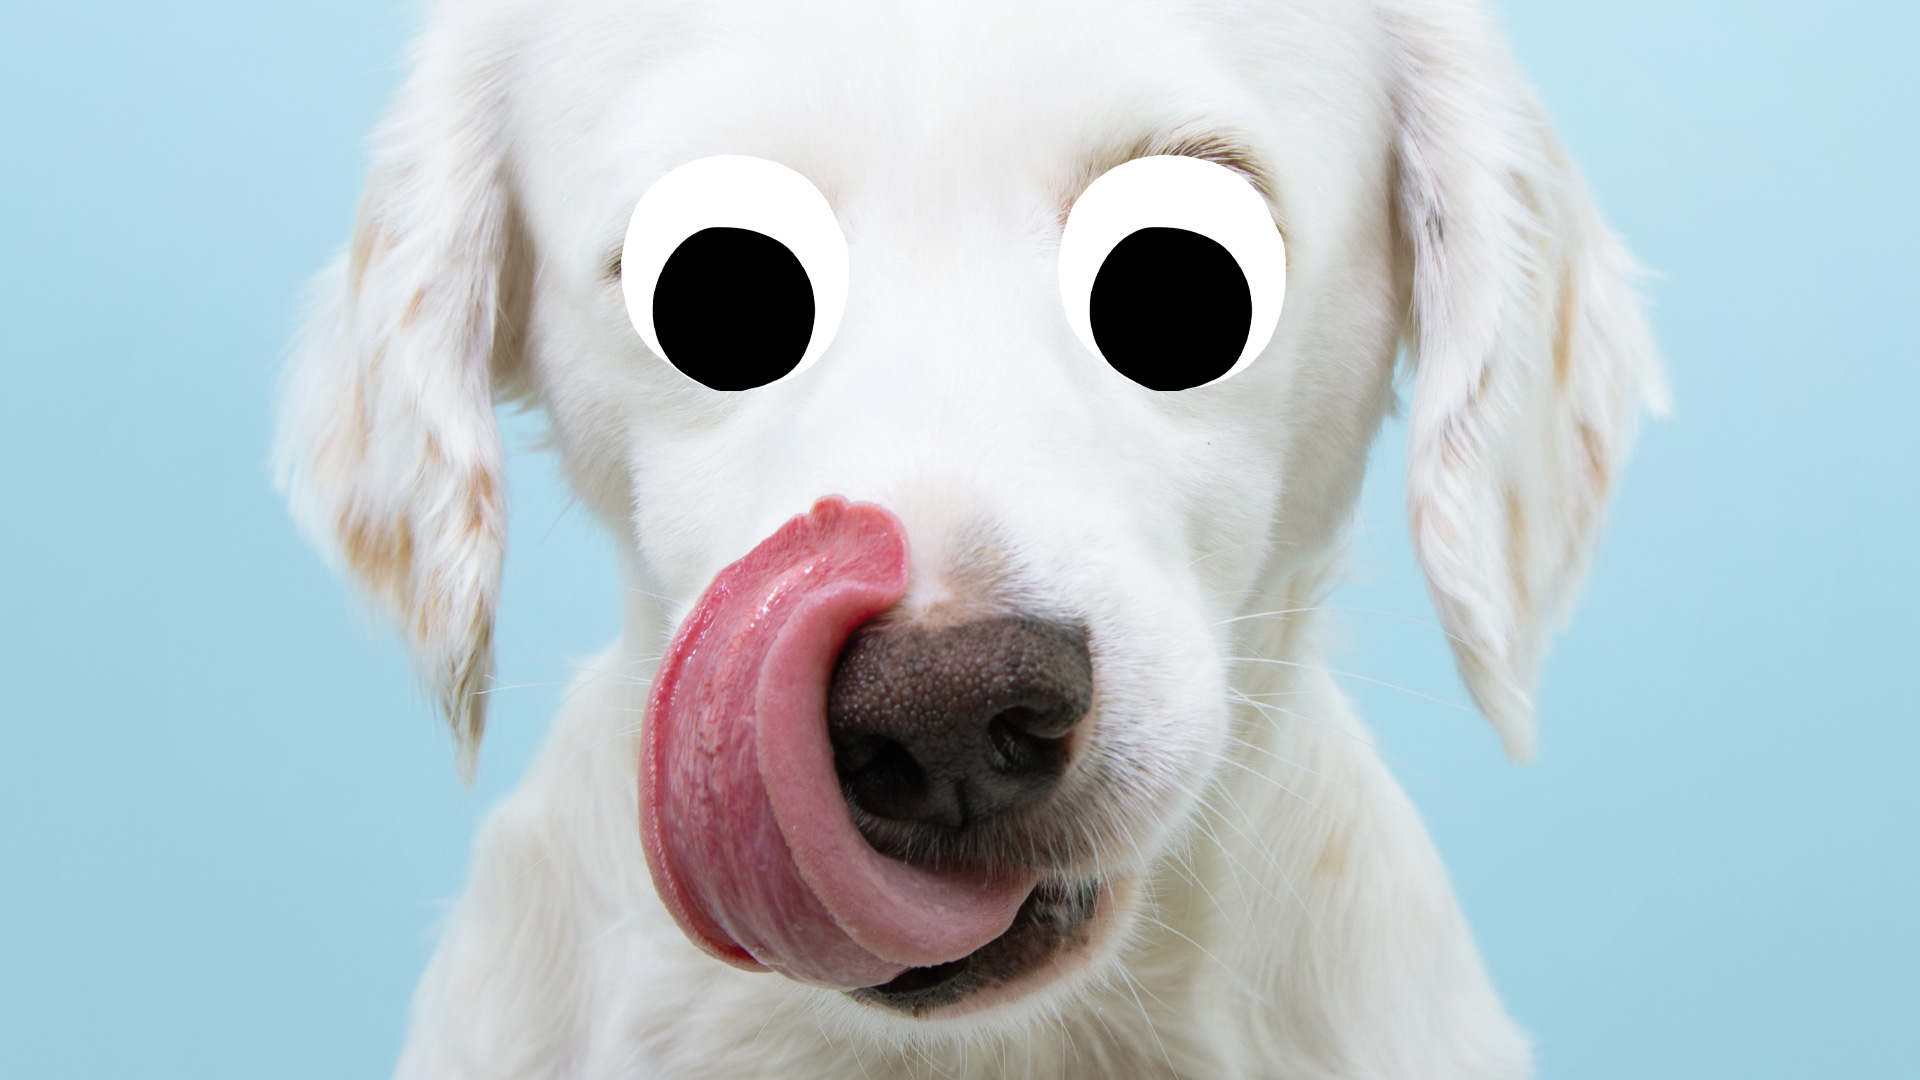 A dog licking its own nose